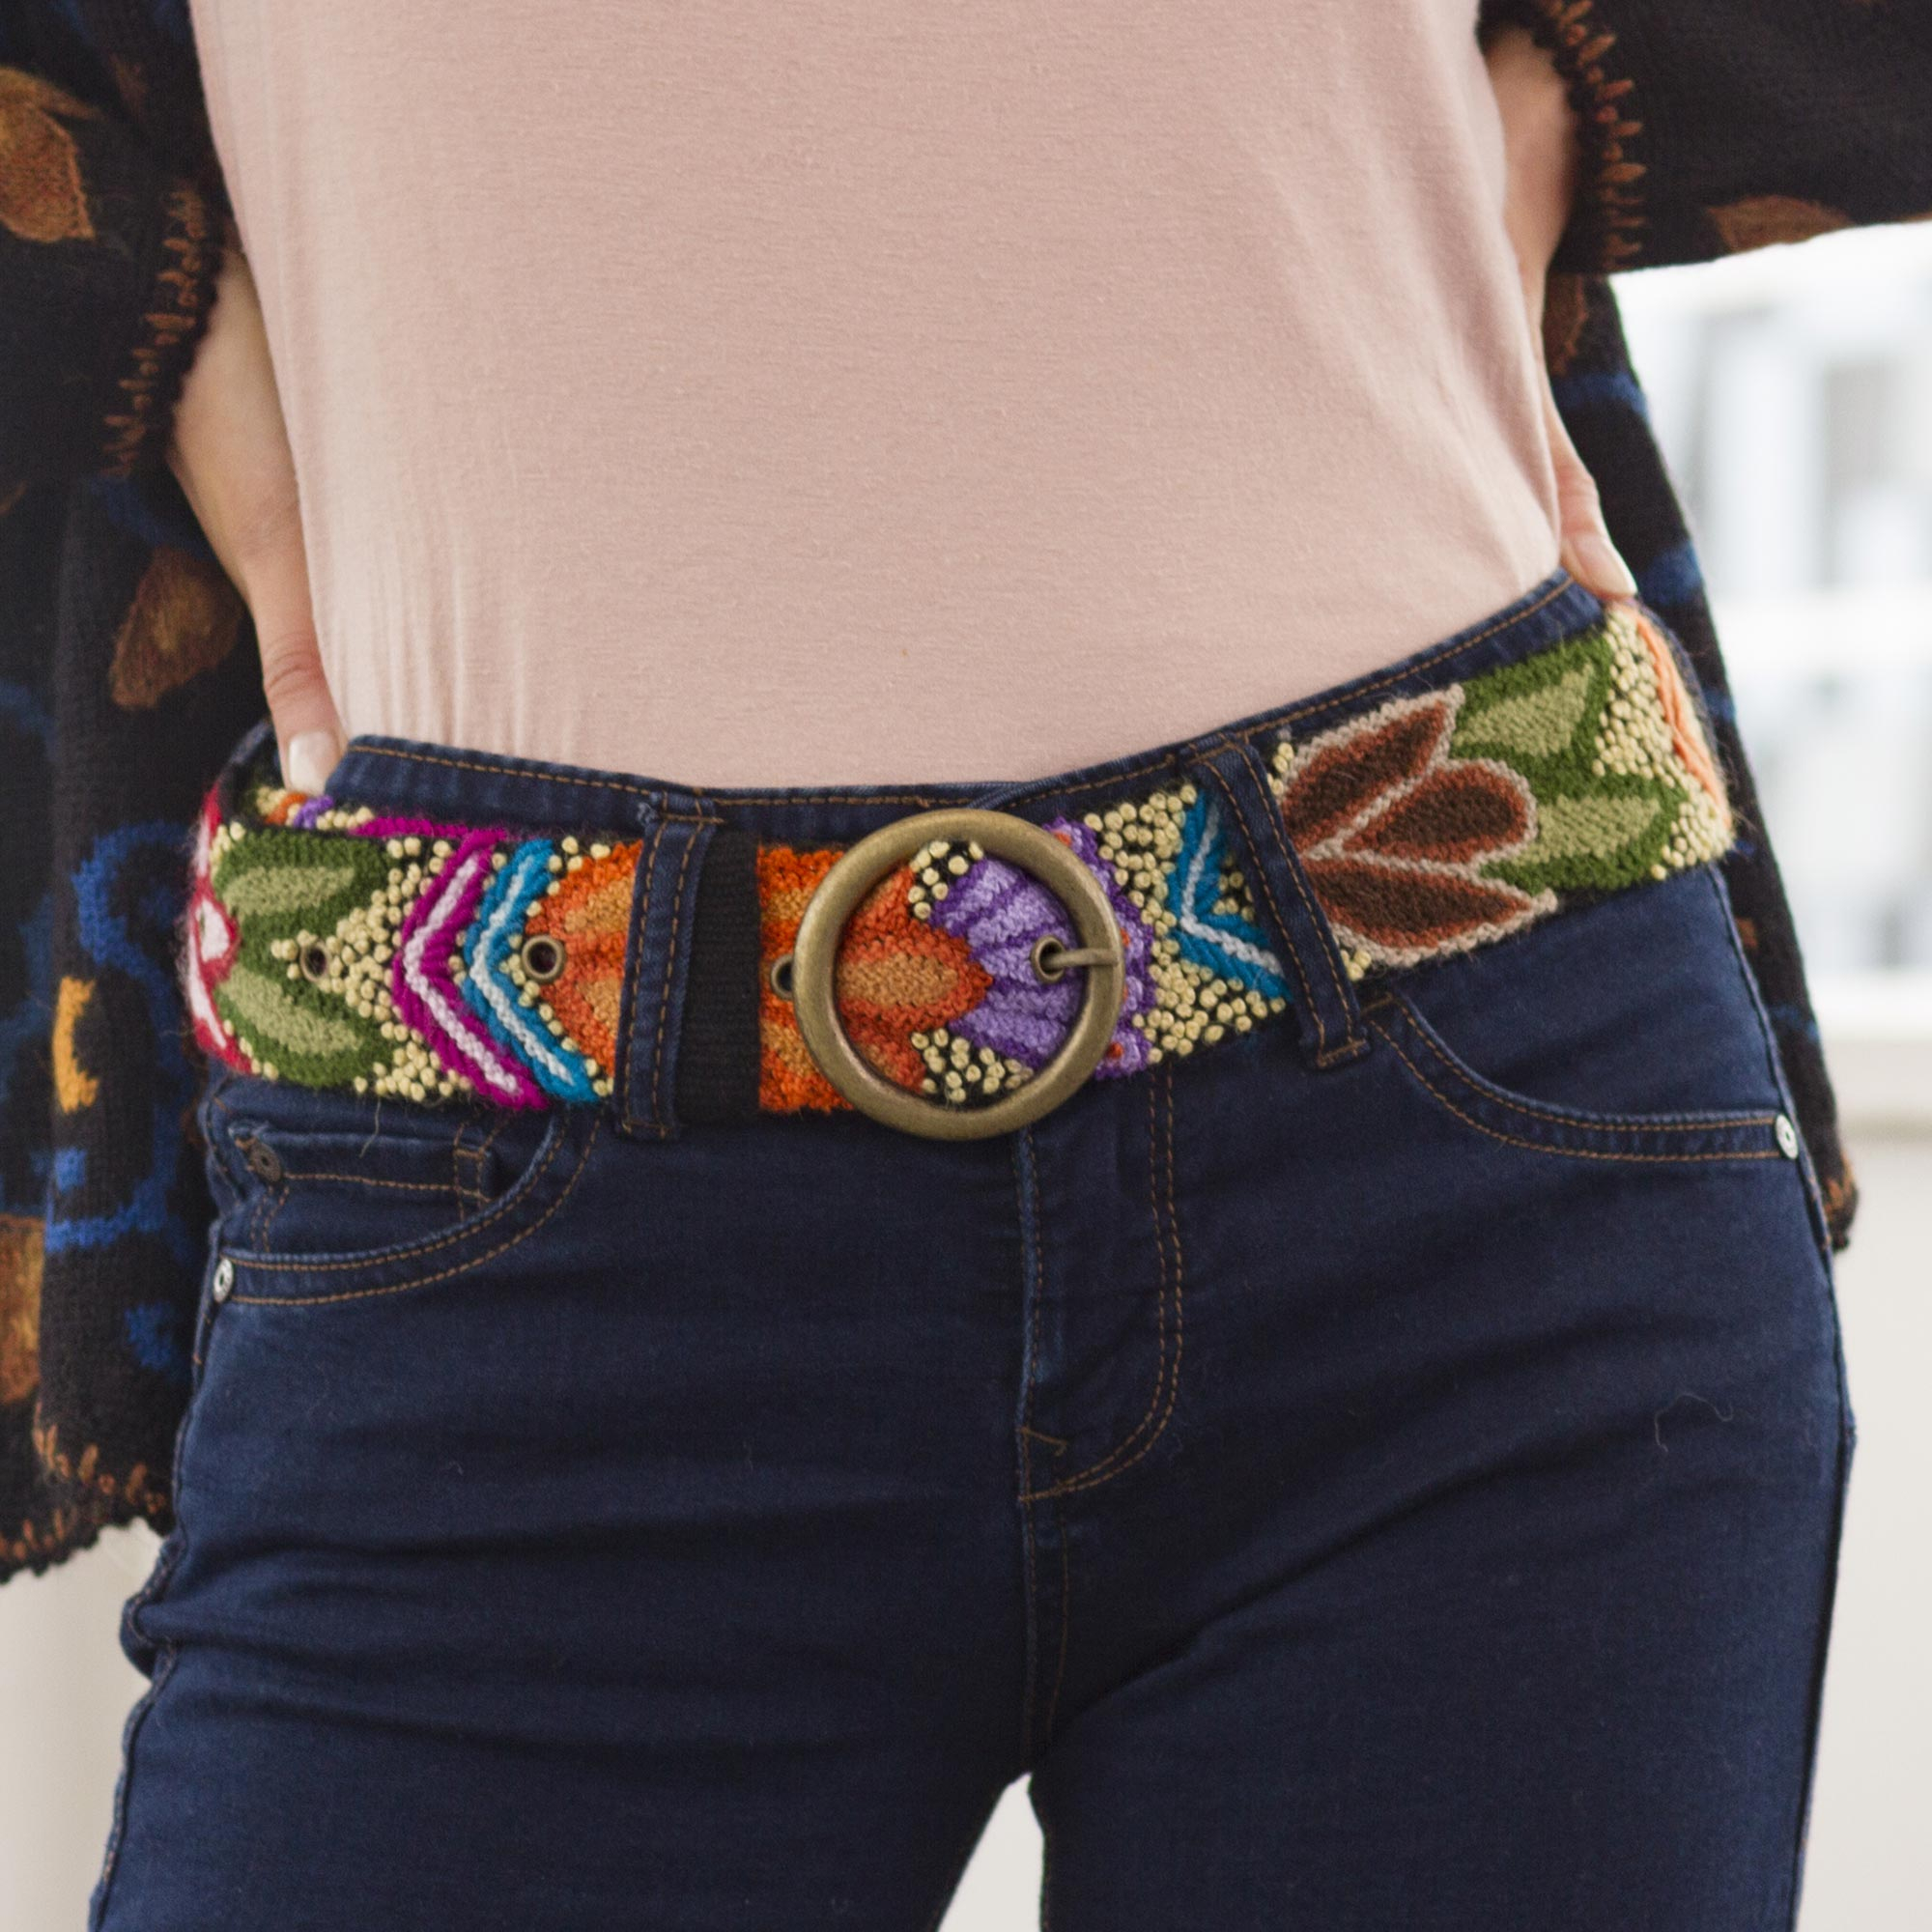 Handmade in the Andes size Medium Embroidered Wool Peruvian Floral Belt 100% Wool with Metal Buckle